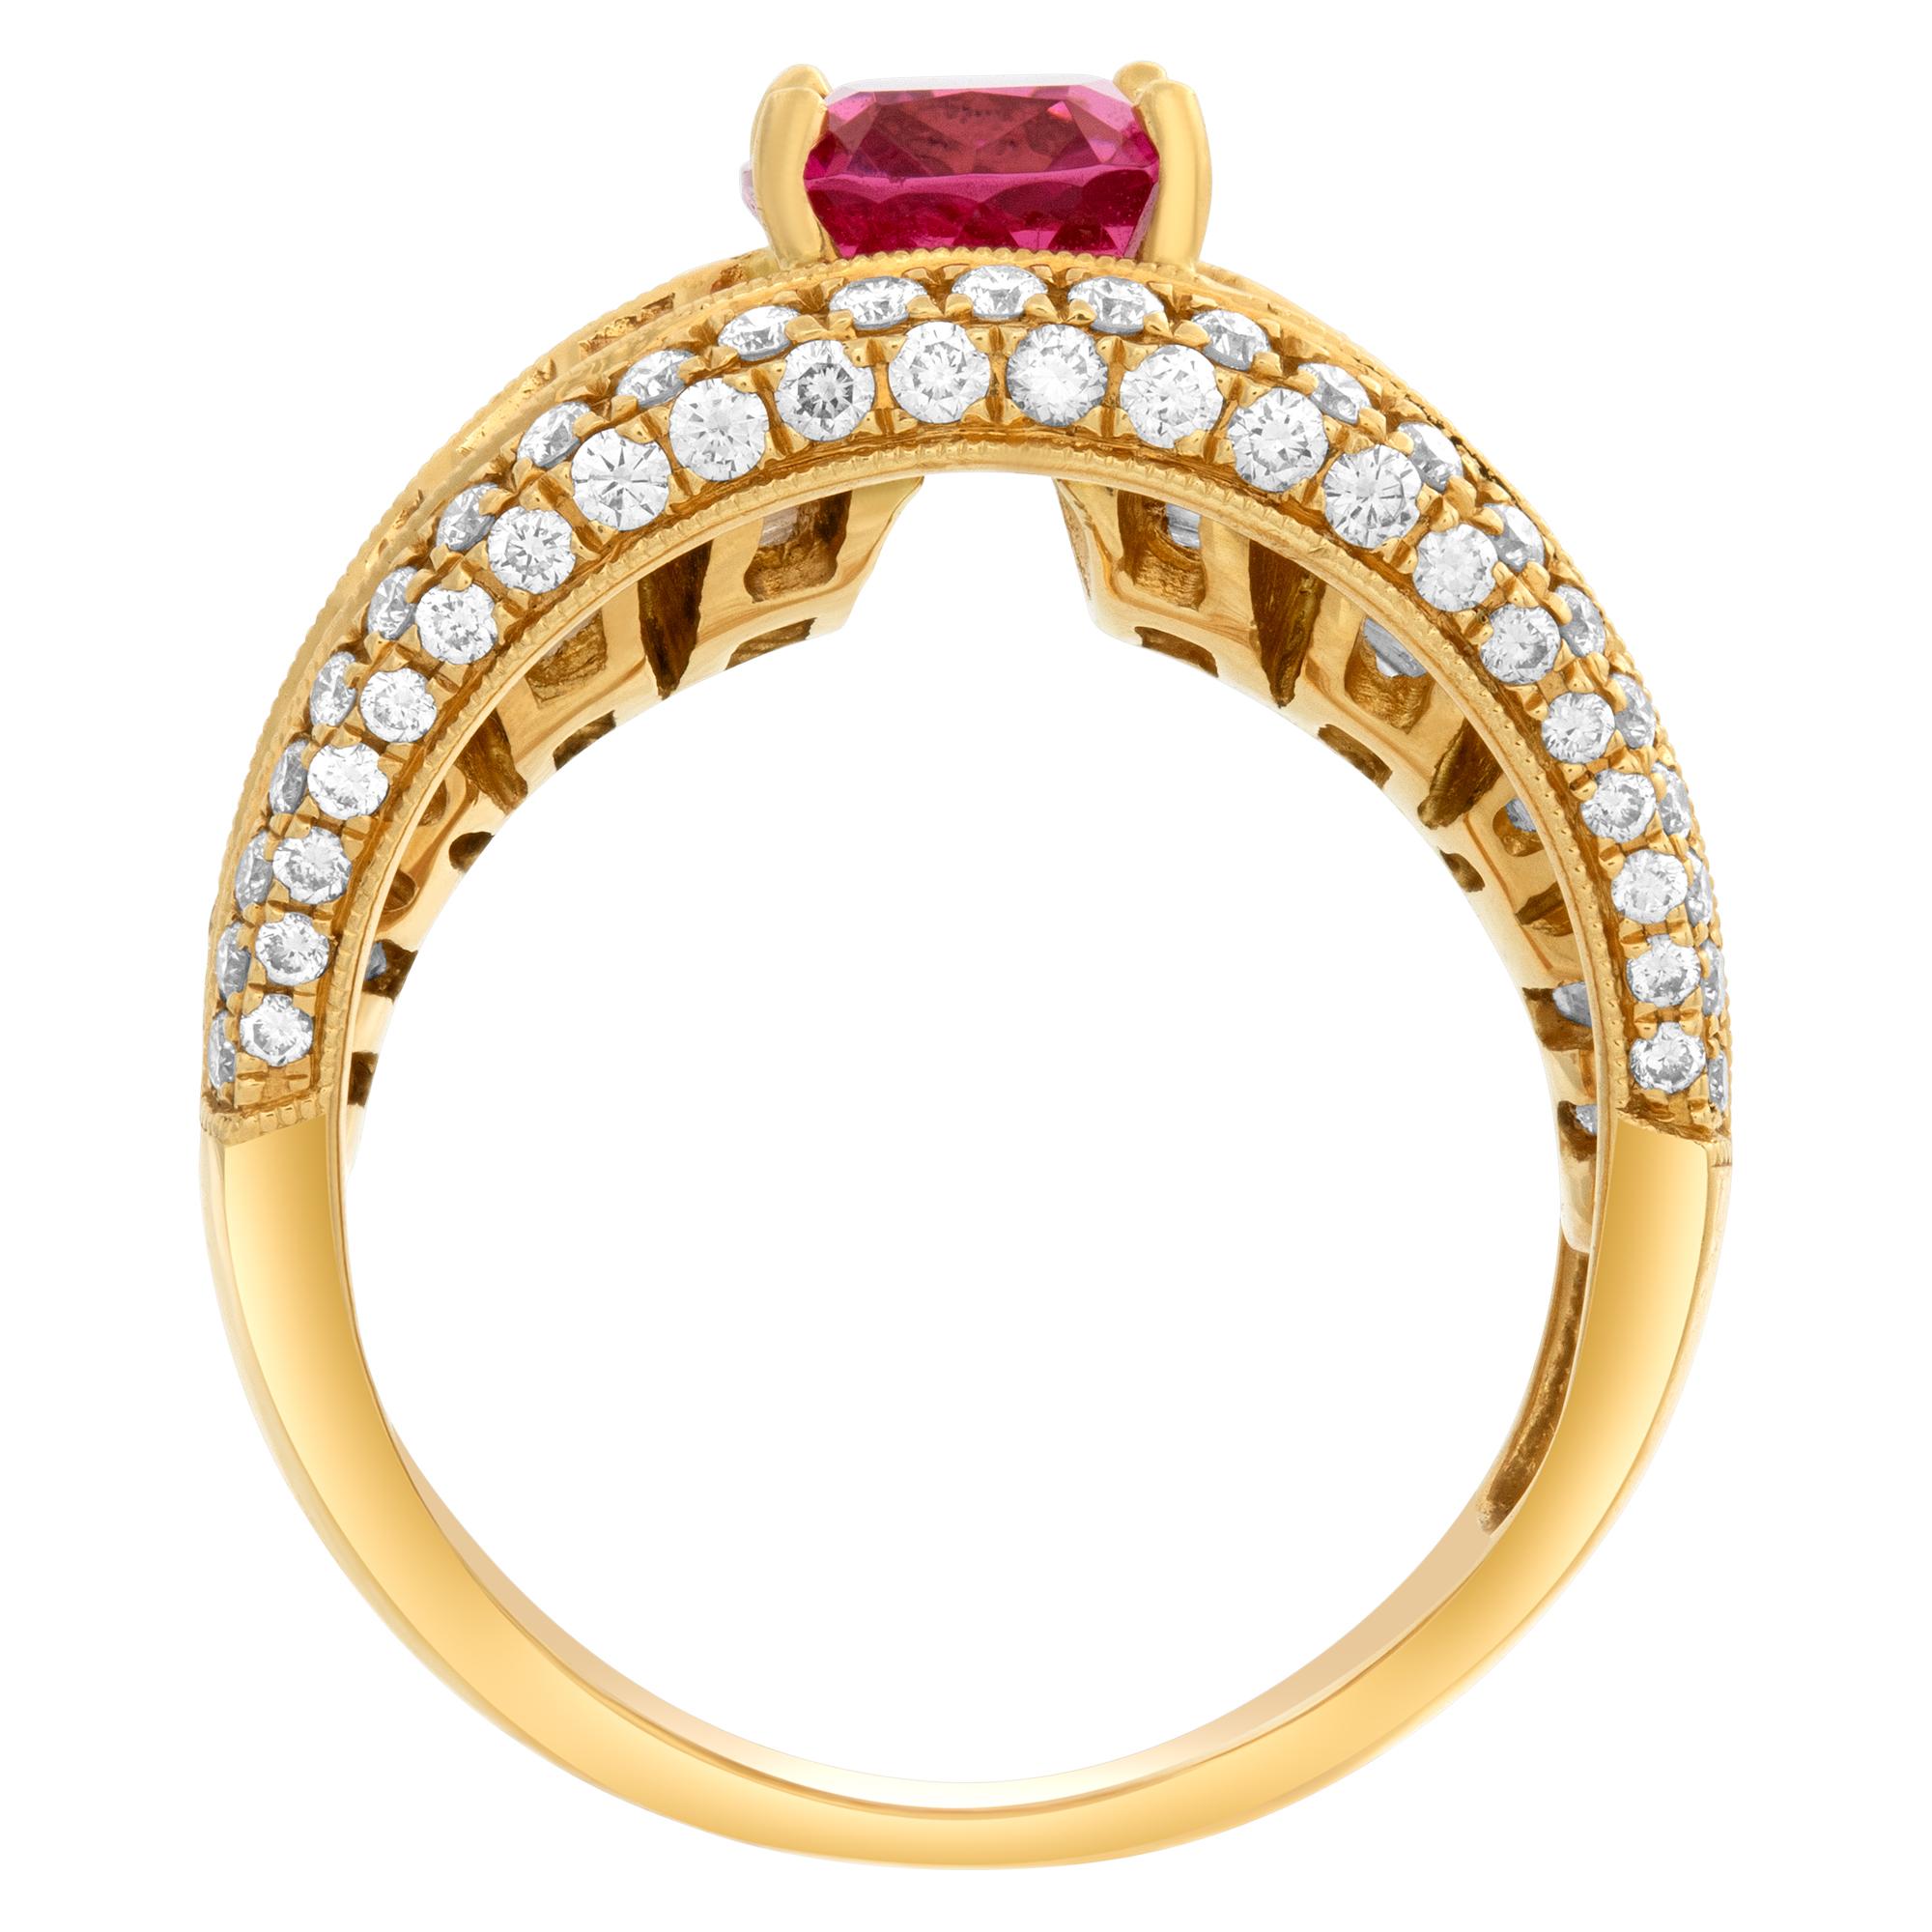 18k yellow gold ring with Oval brilliant cut pink spinel (2.73 carats) & diamond For Sale 1